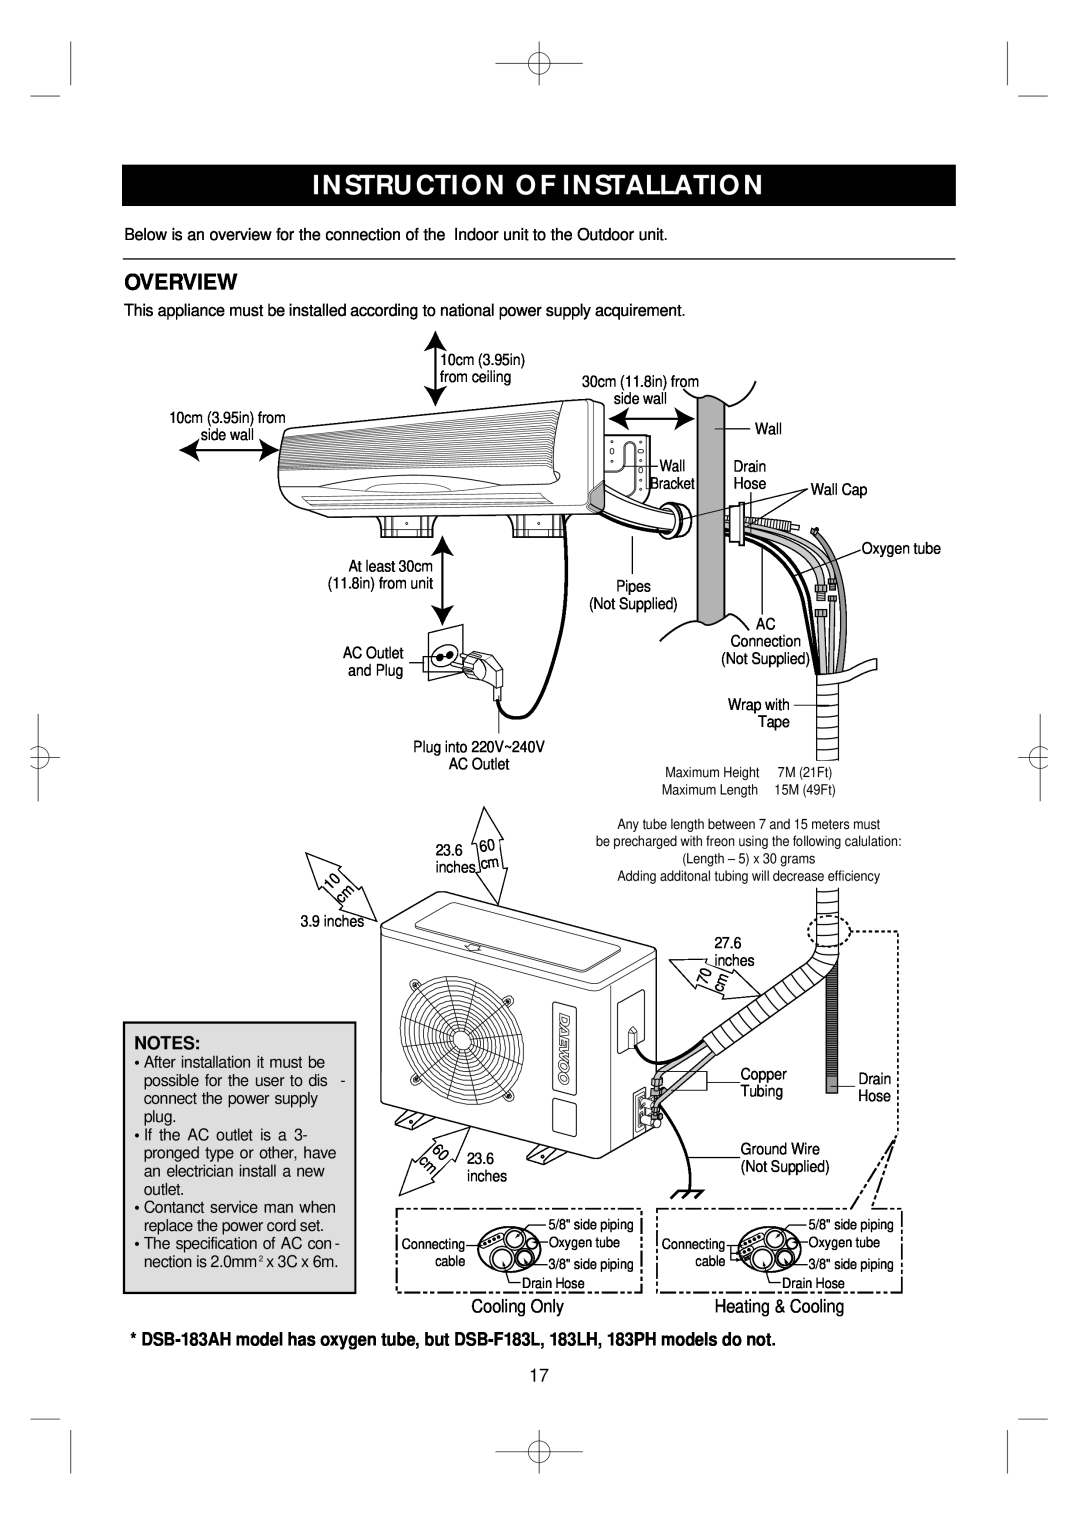 Daewoo DSB-F183L owner manual Instruction Of Installation, Overview 